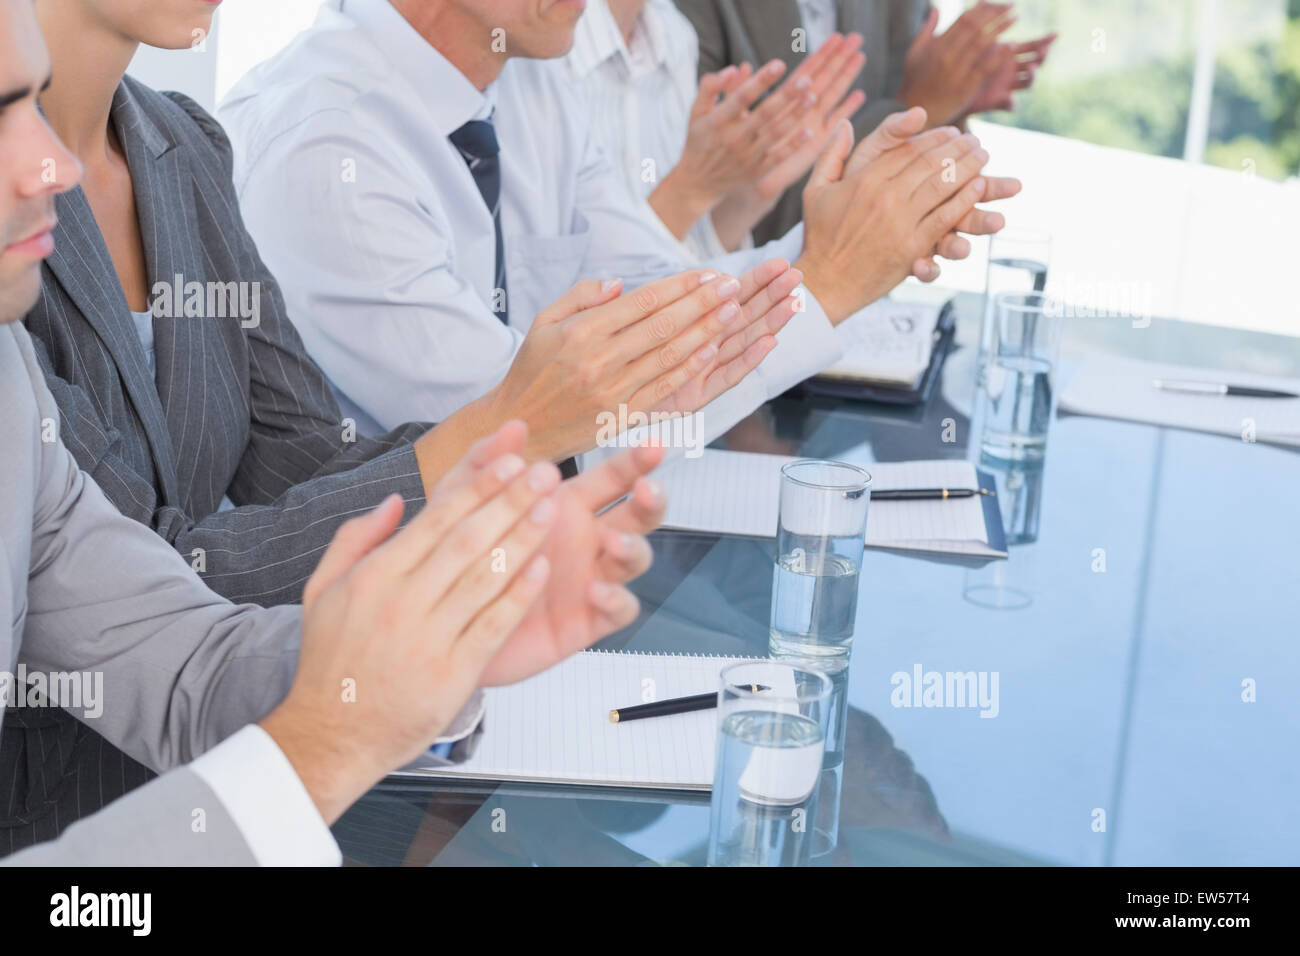 Business team applauding during conference Stock Photo